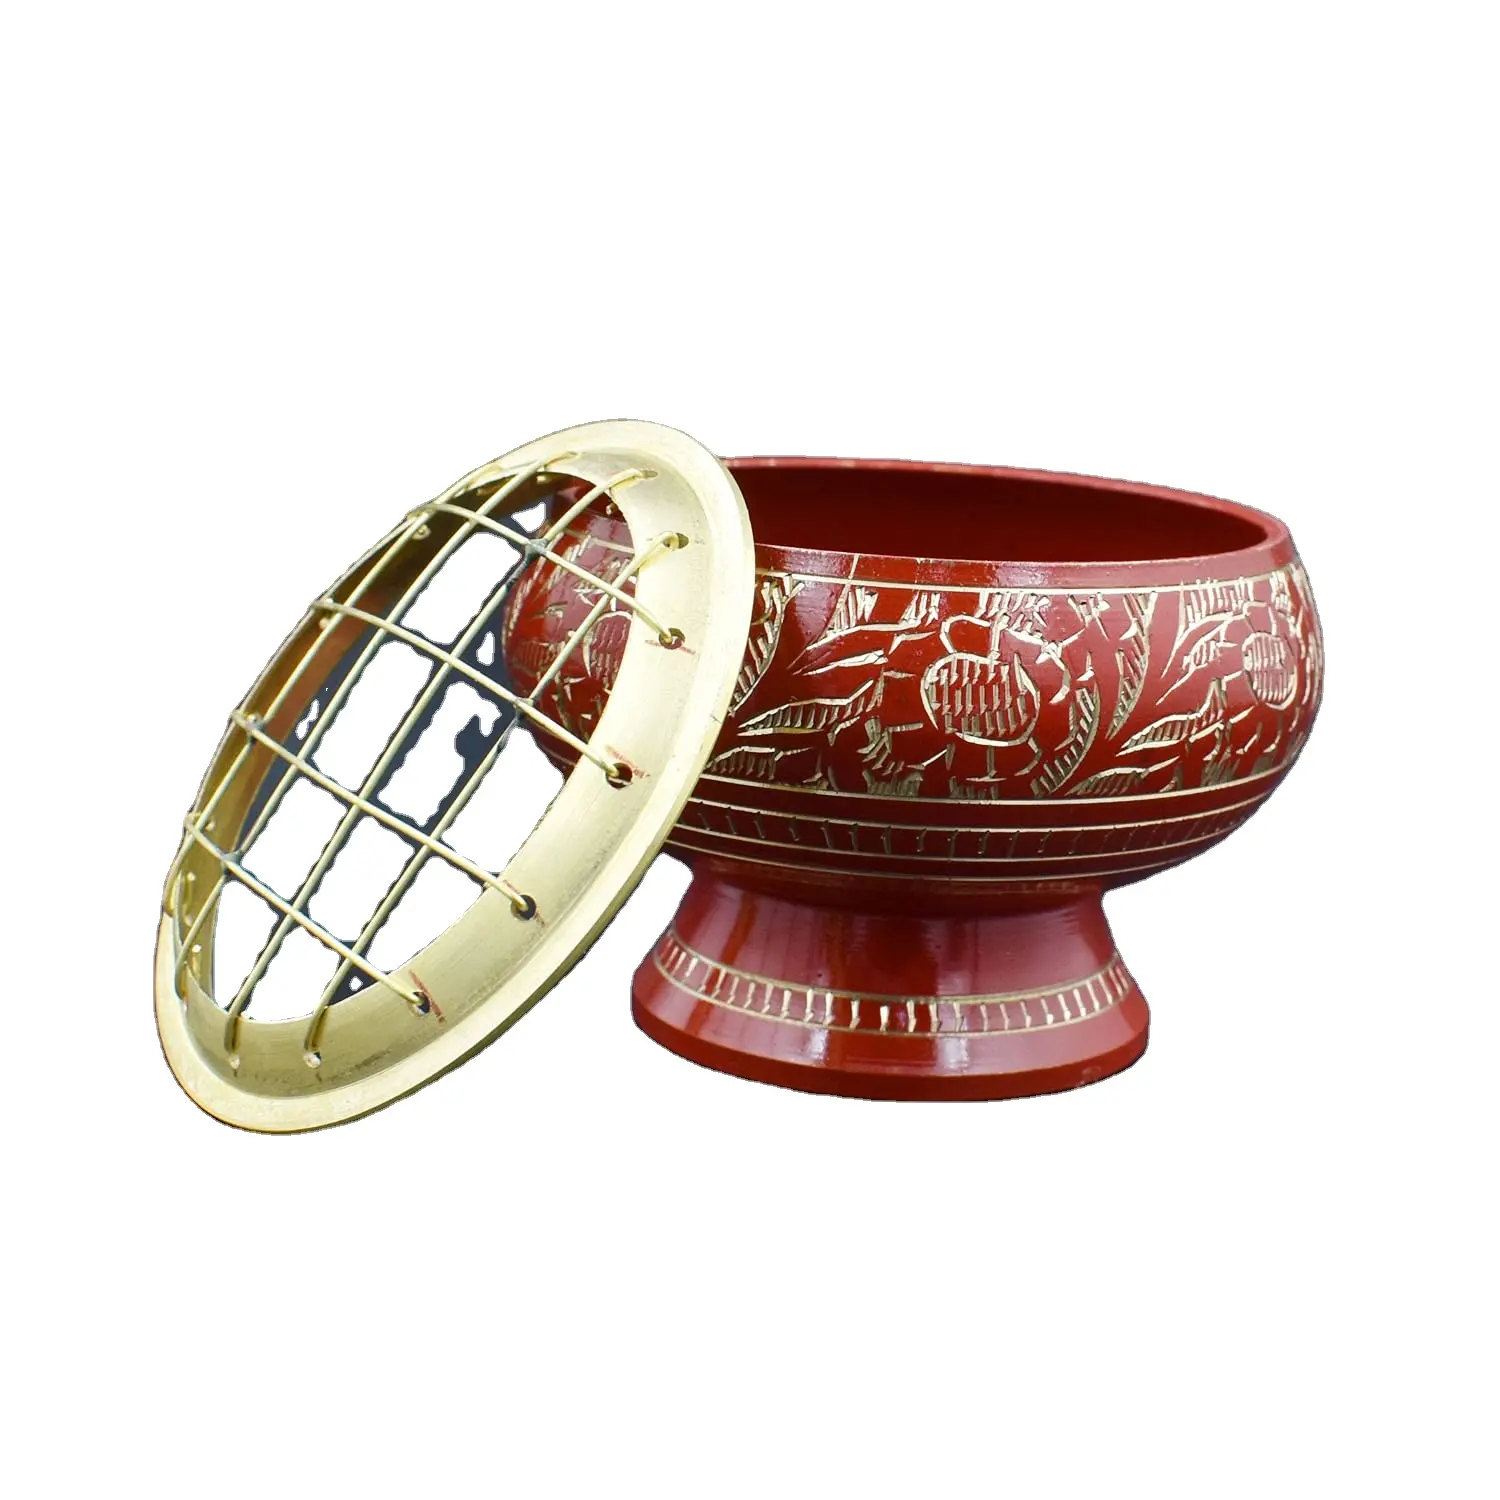 Hand Crafted Engraving Work Brass Bowl with Cover for Sage Burning red Enamel Finished Luxury Bowl